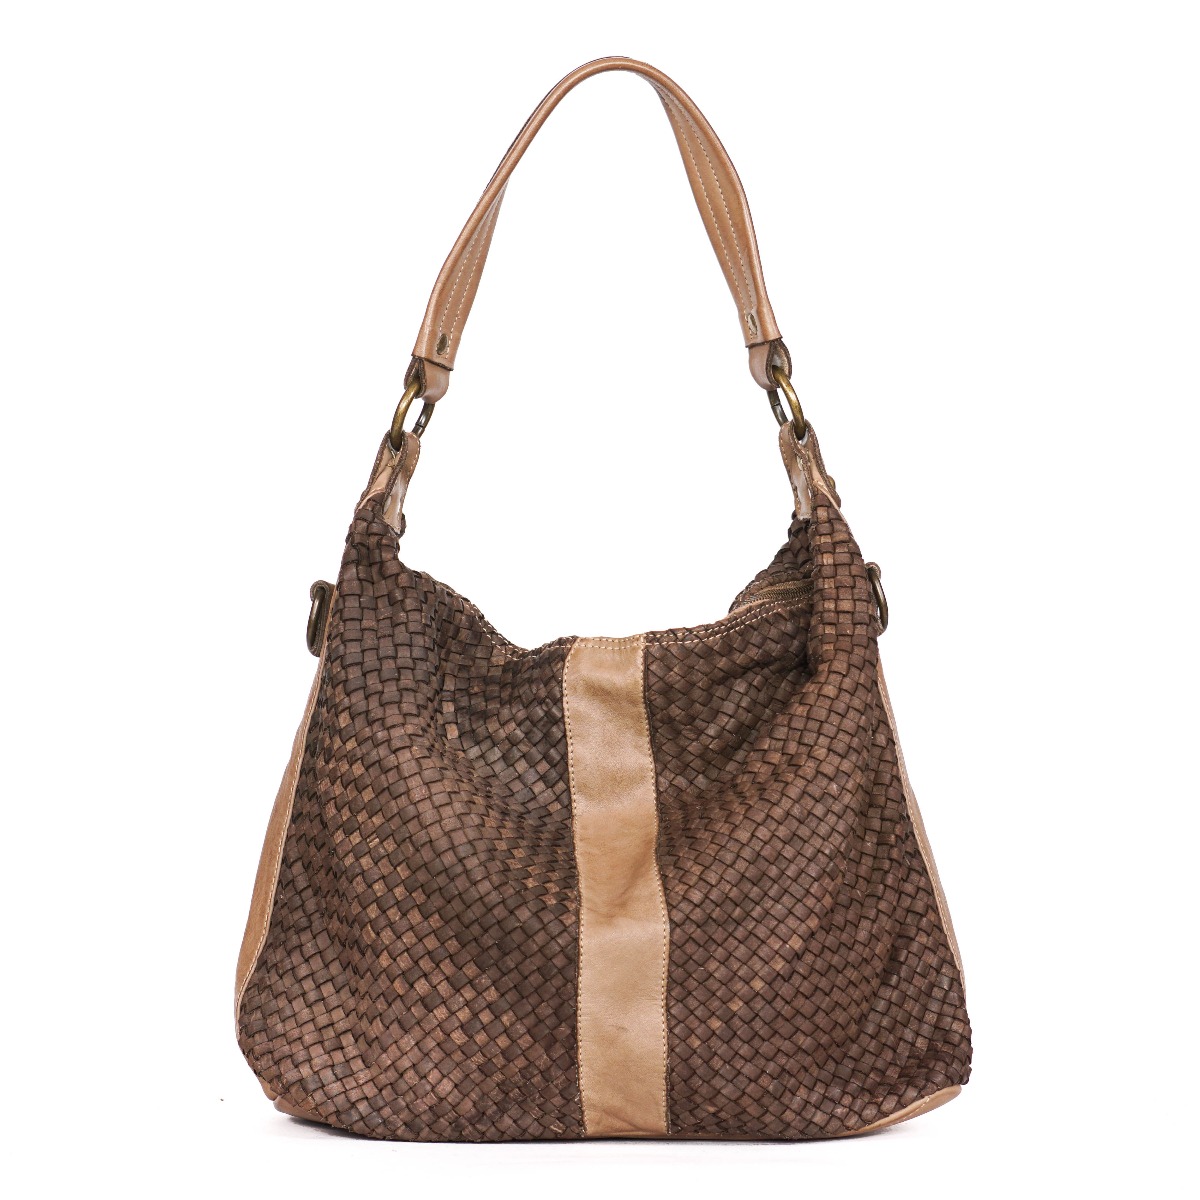 Cross body hobo woven leather bag in taupe color